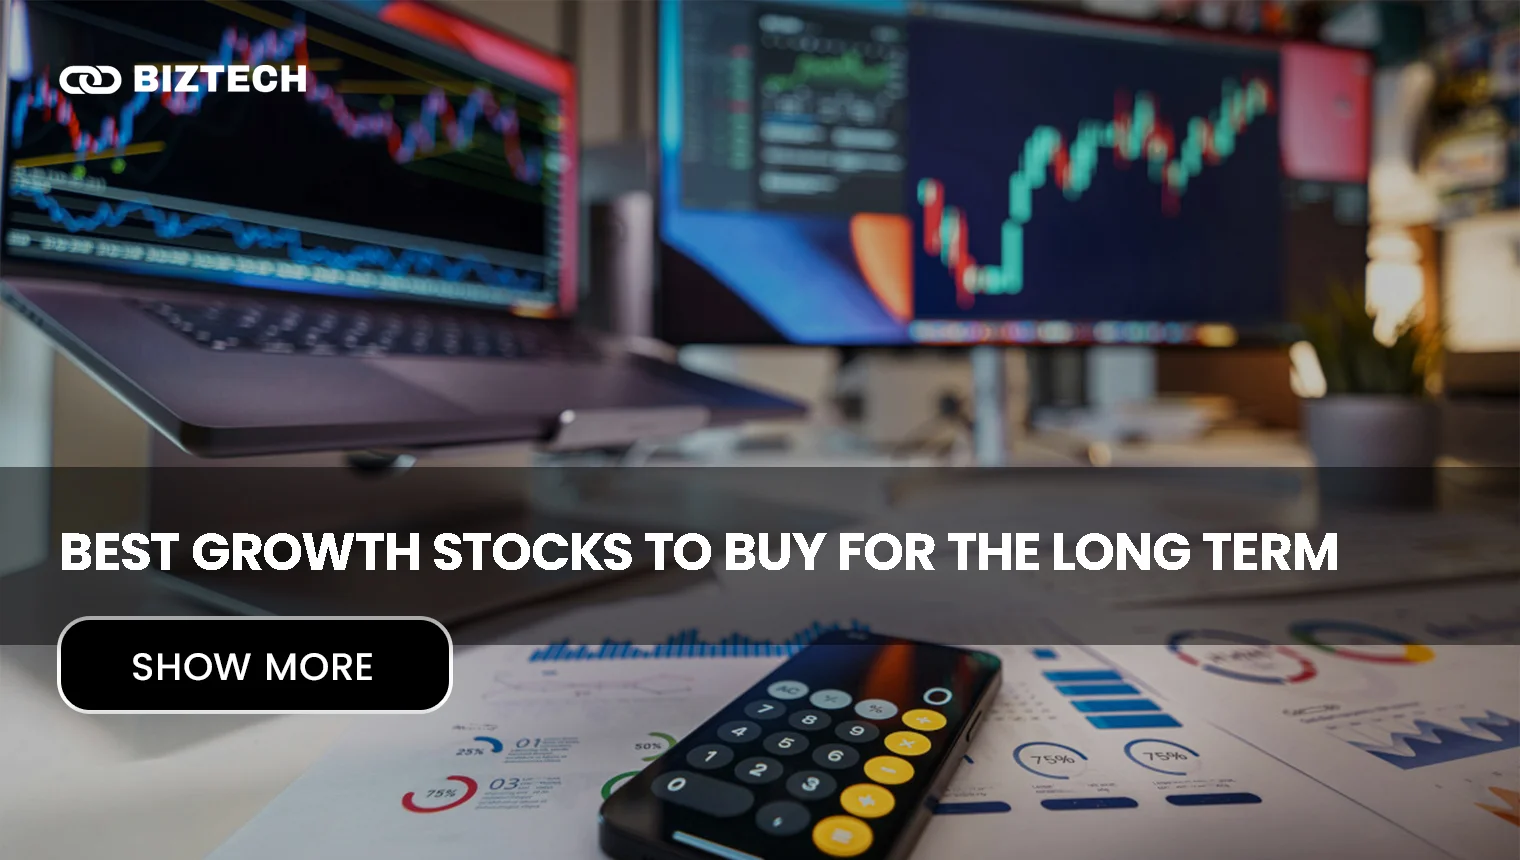 Best Growth Stocks to Buy for the Long Term